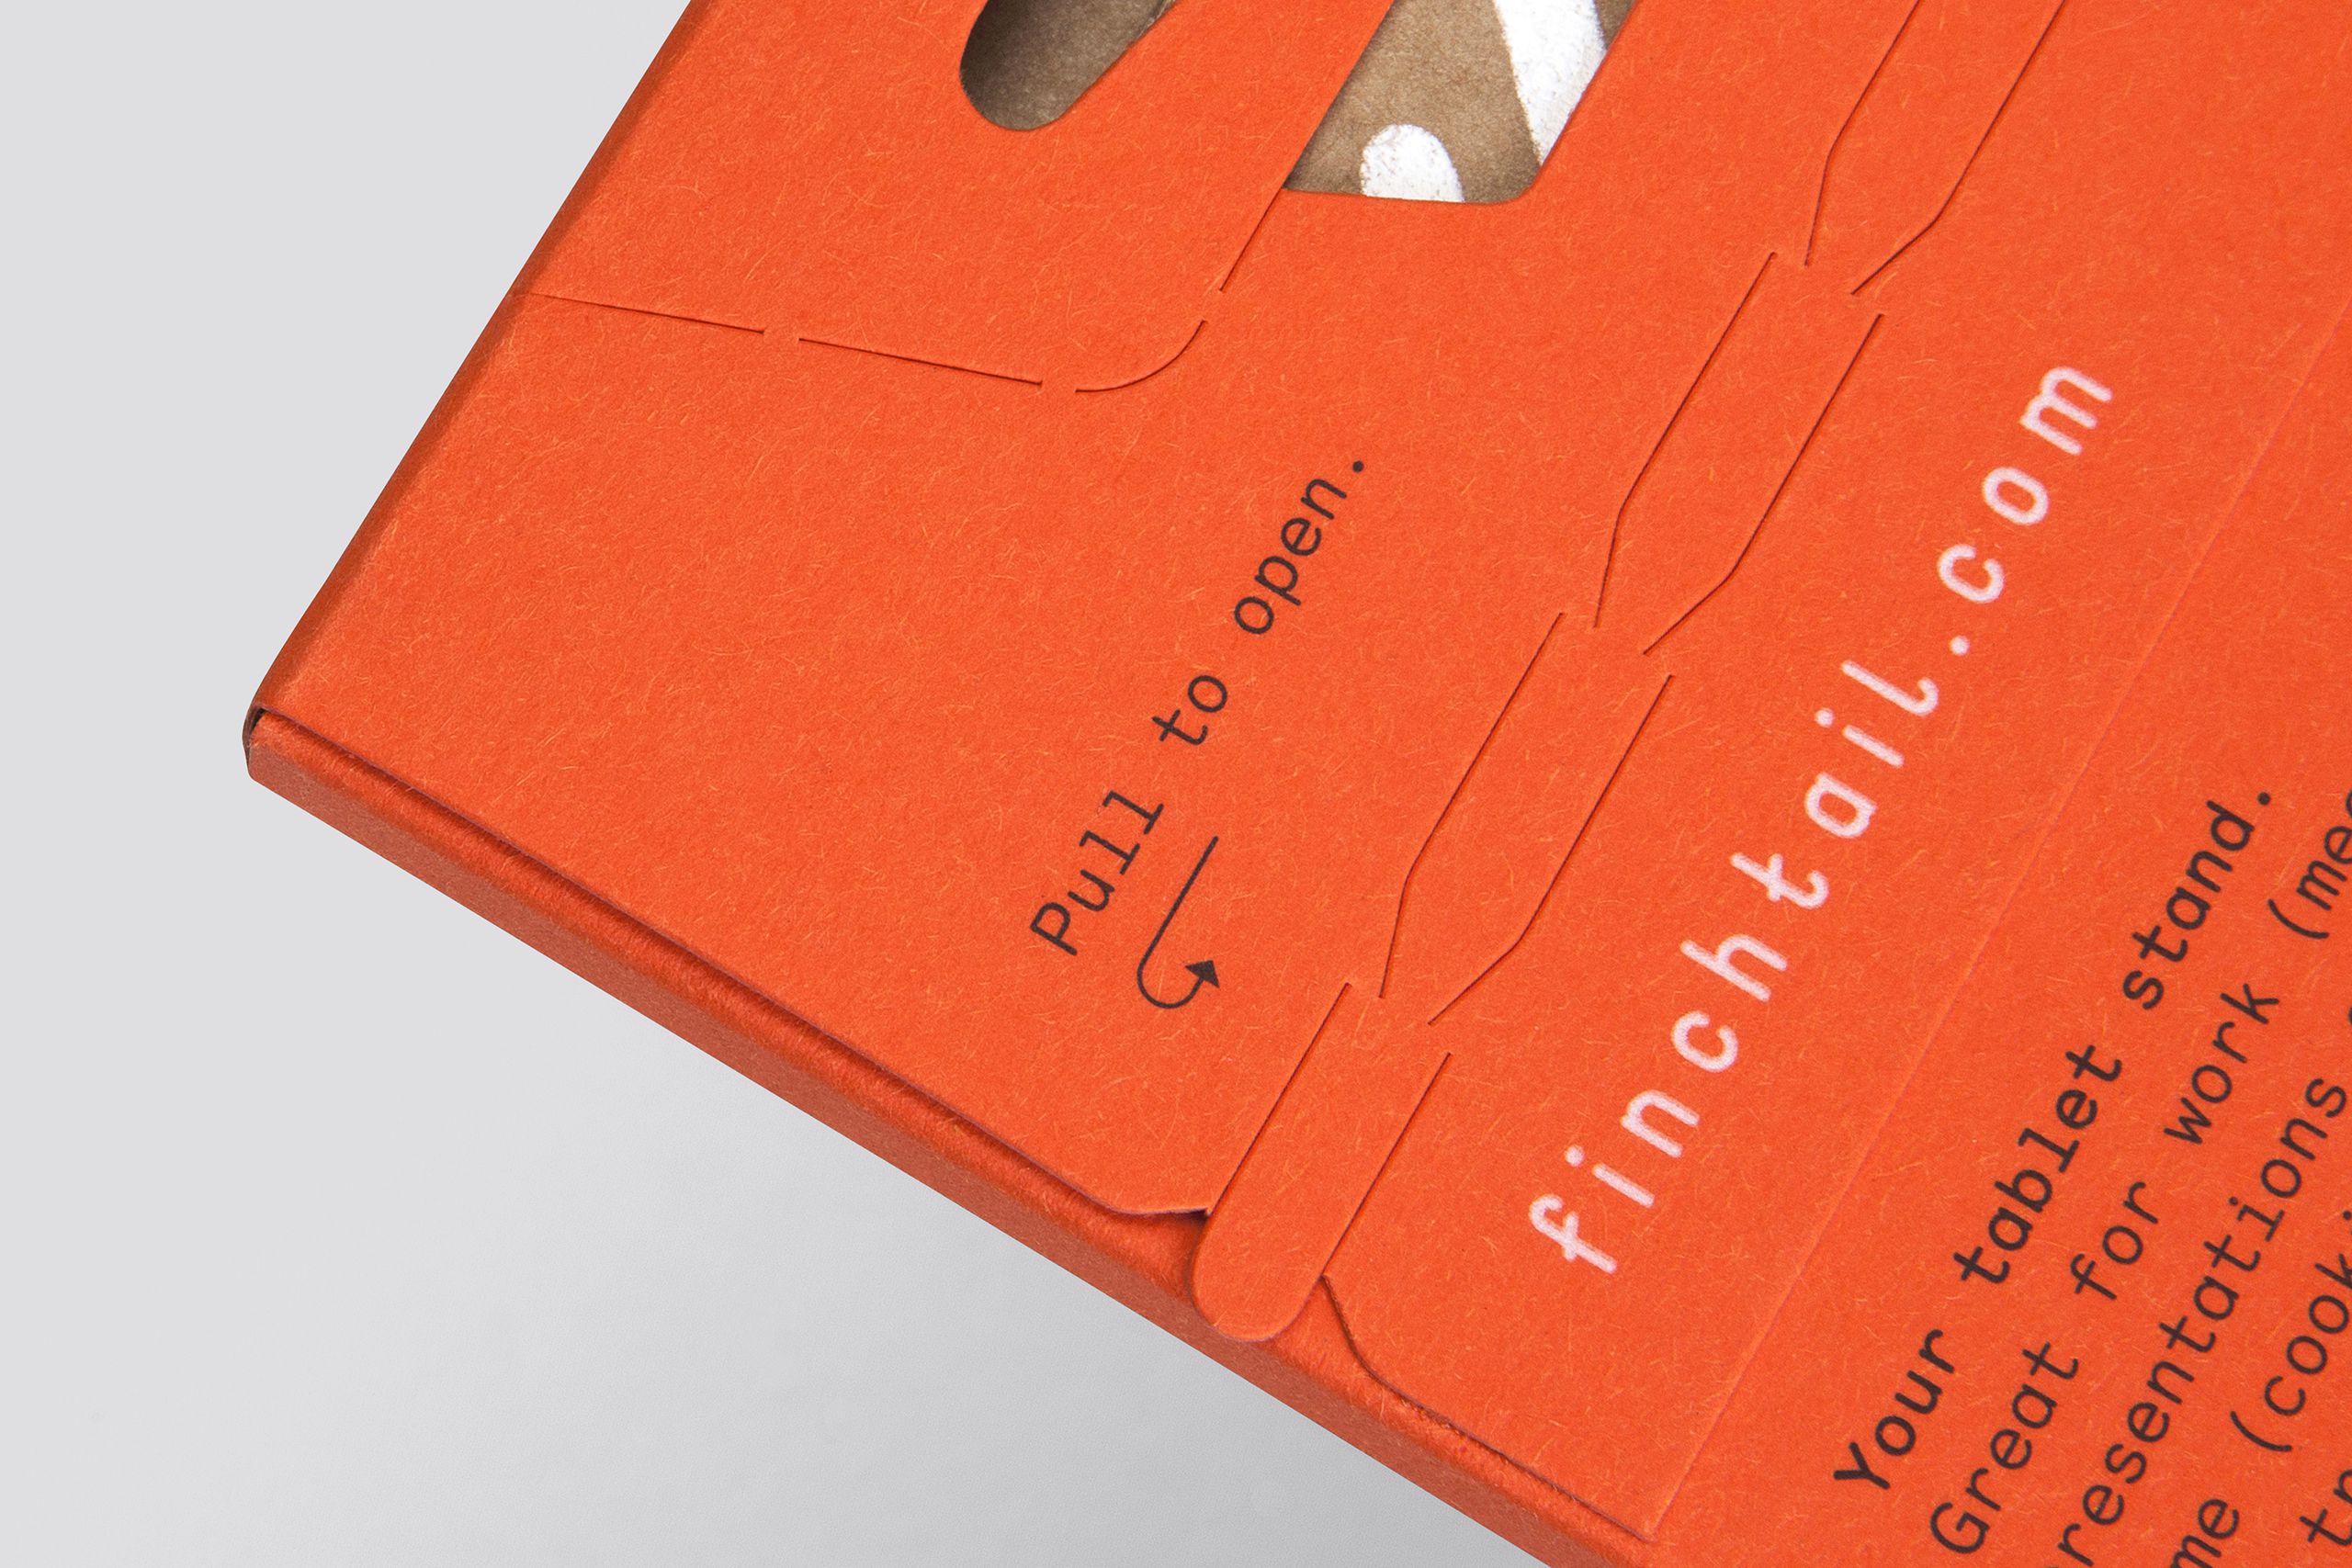 Finchtail - Brand & packaging